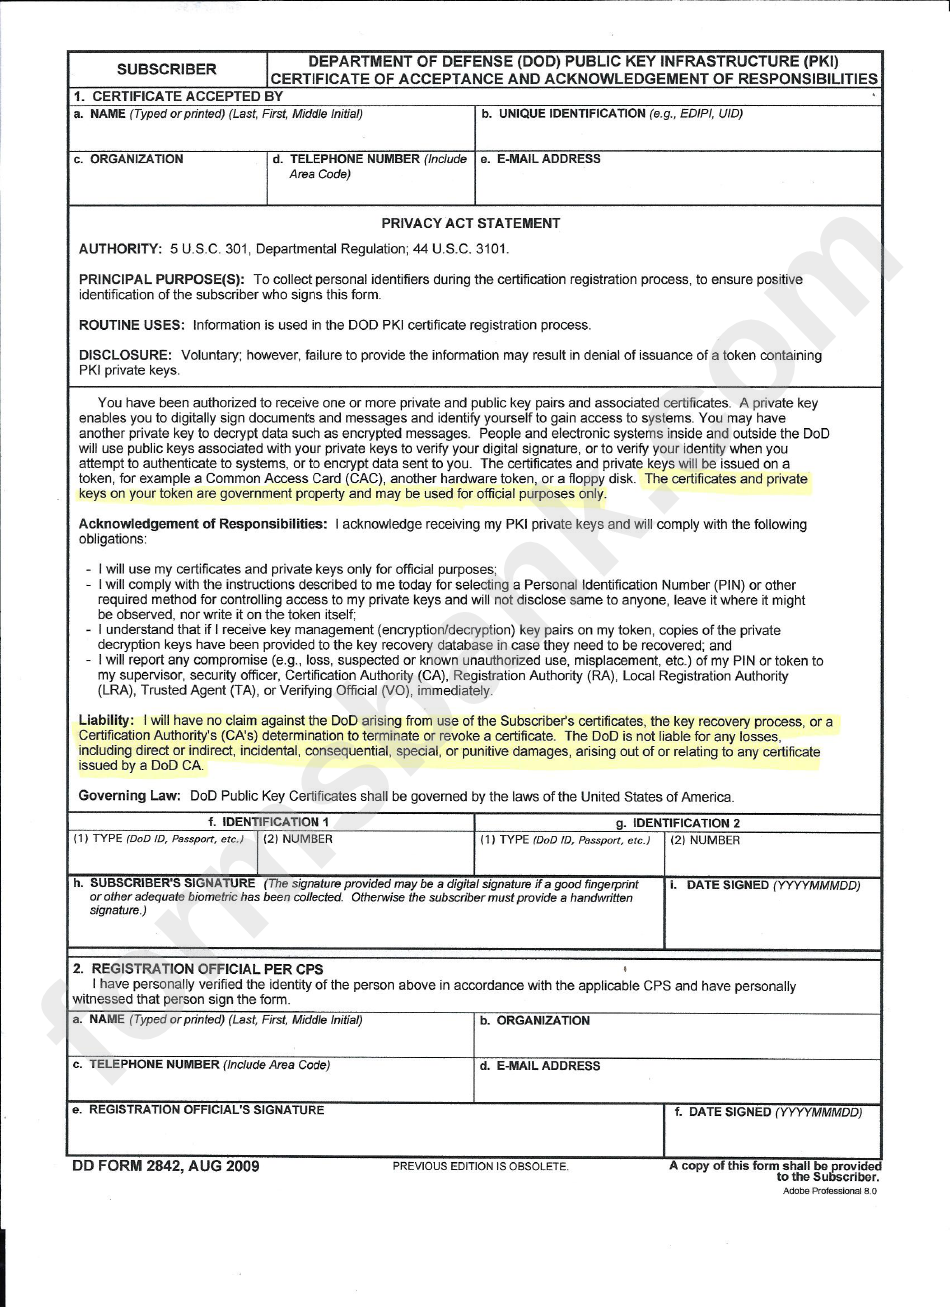 Dd Form 2842 - Certificate Of Acceptance And Acknowledgement Of Responsibilities Form